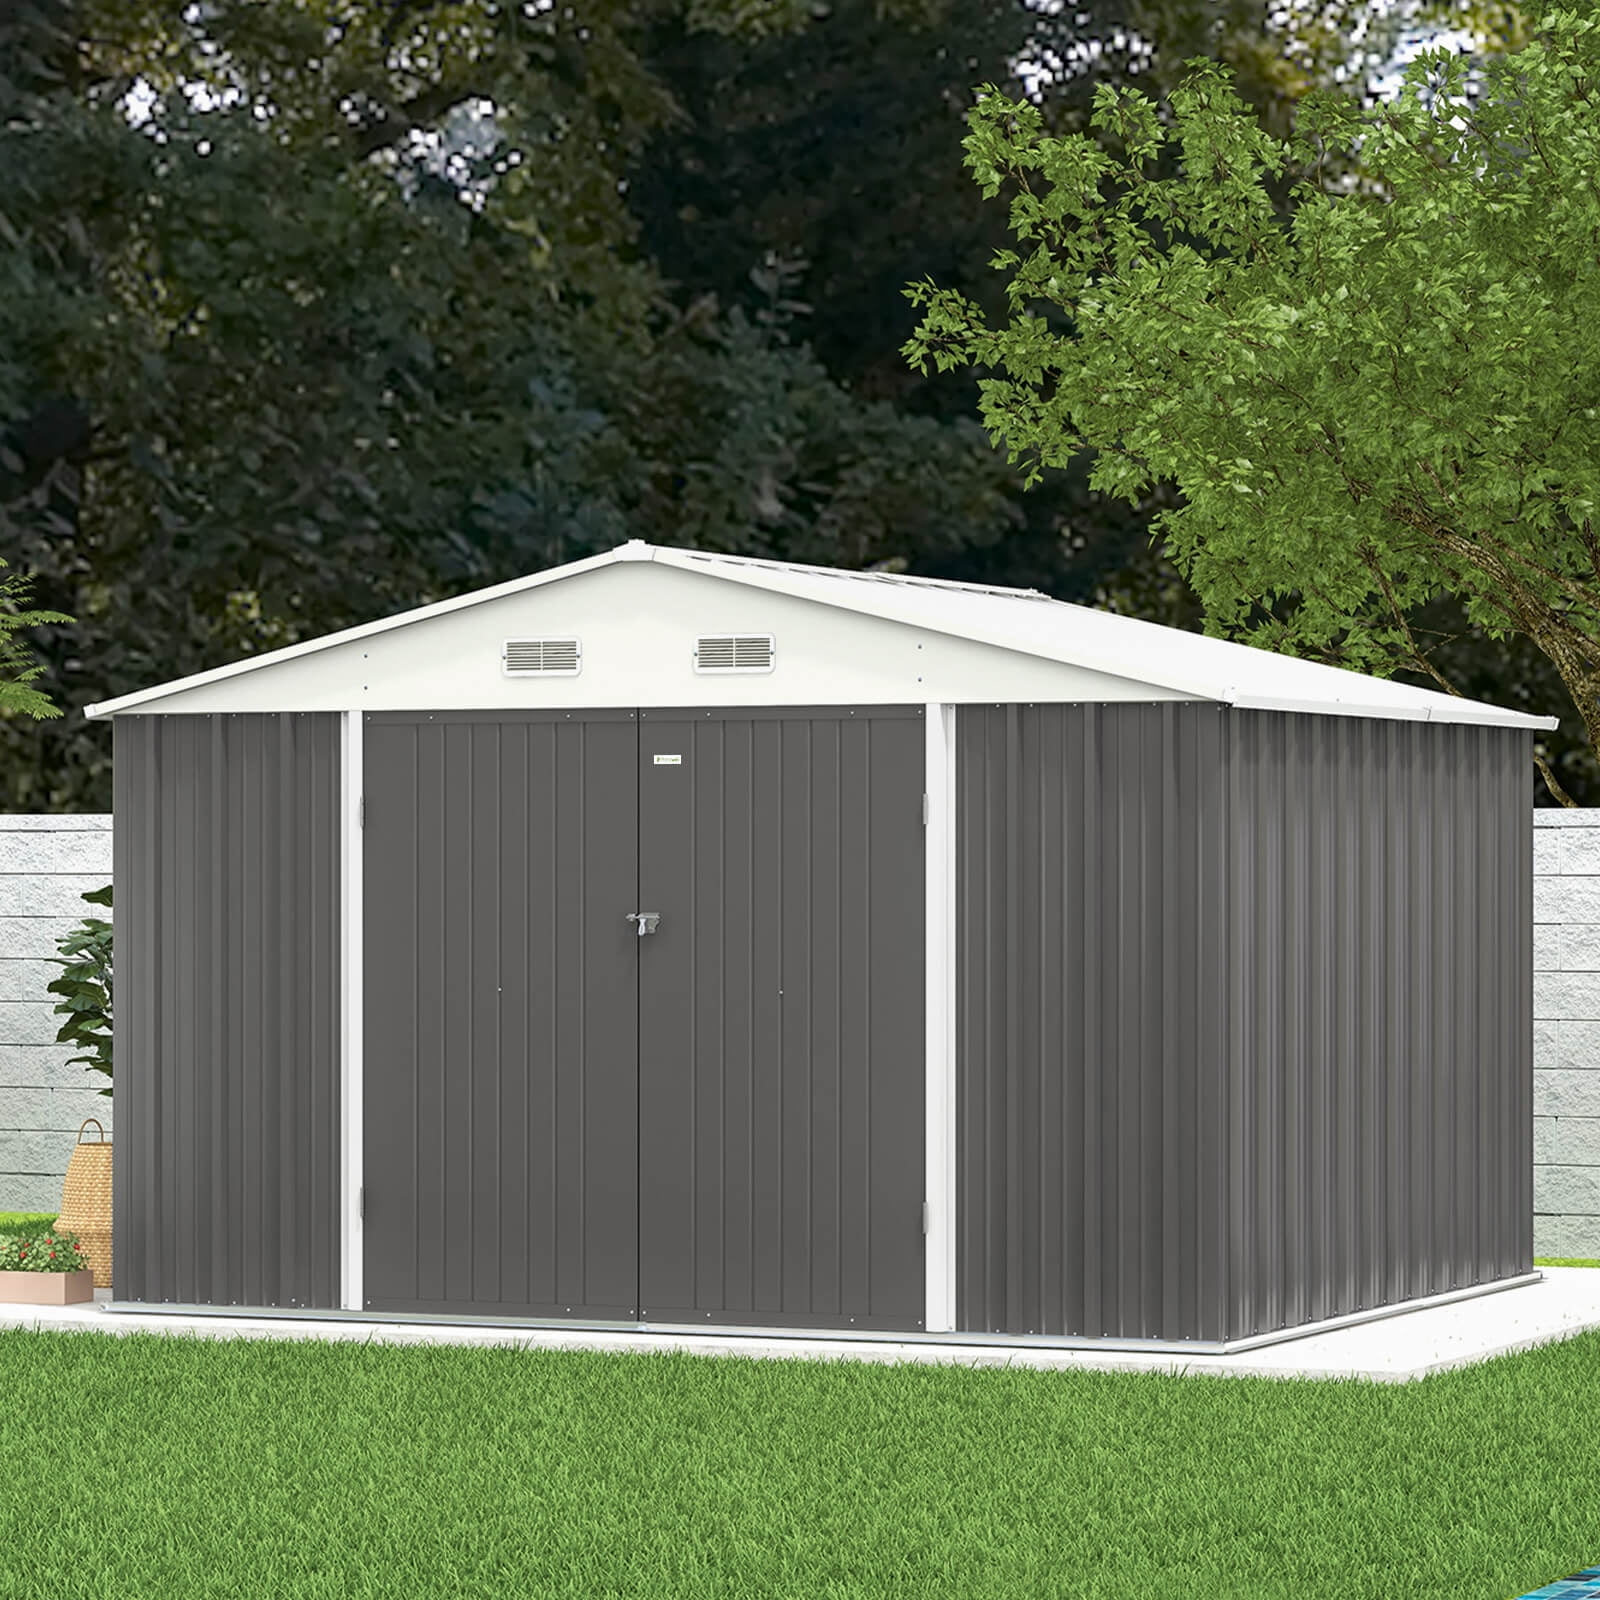 Patiowell 10 x 8 ft. Galvanized Steel Shed Metal Outdoor Storage Shed ...